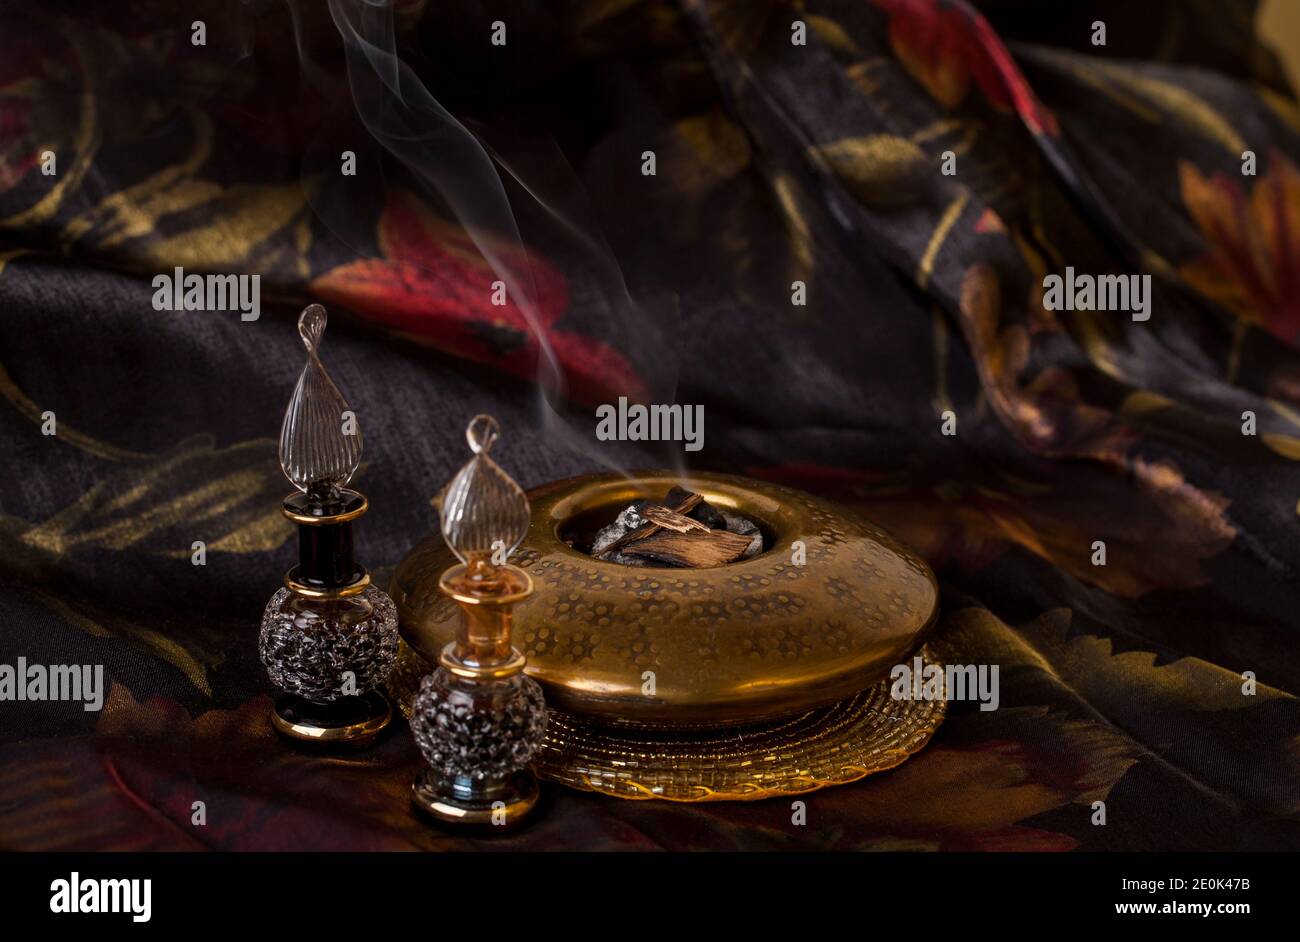 Agarwood, also called aloeswood, essential oil and burning incense chips Stock Photo